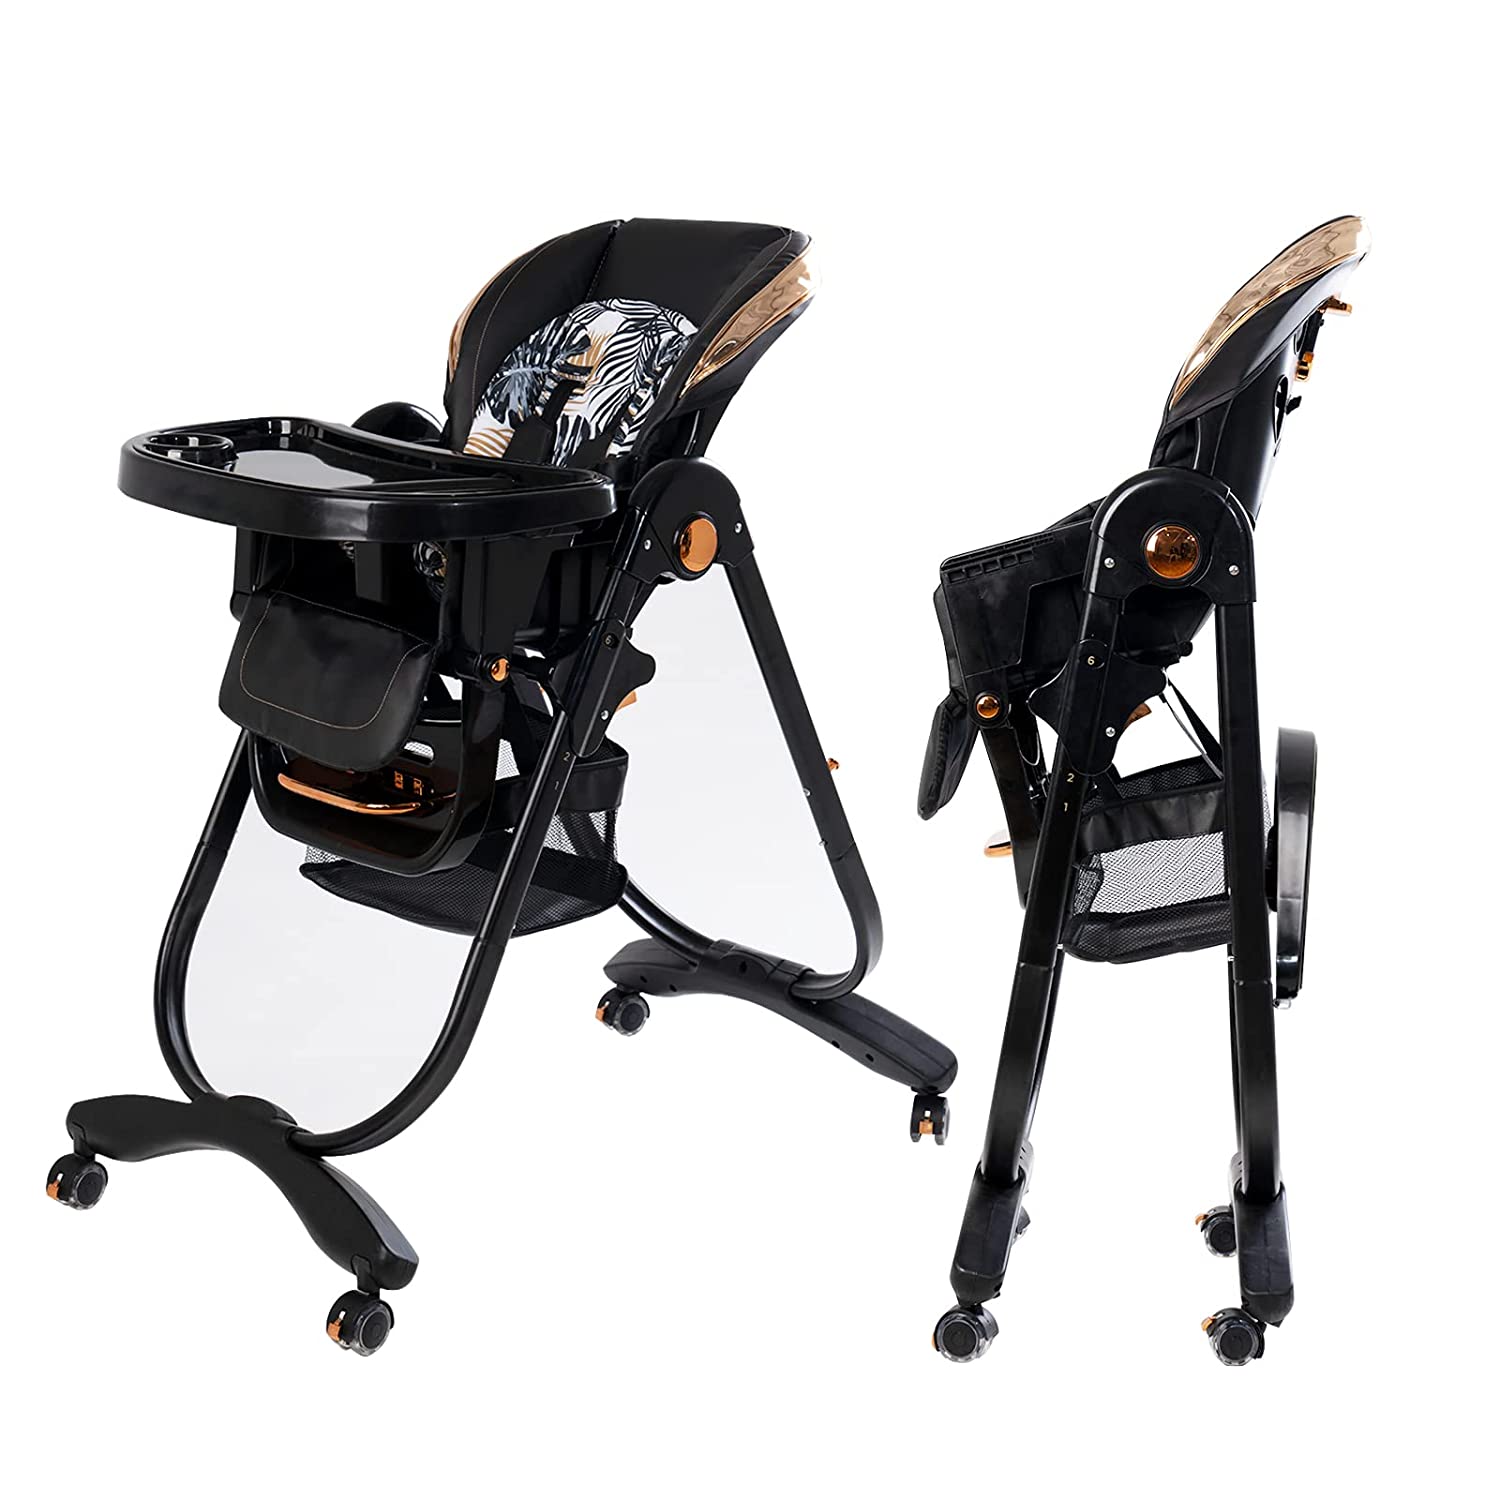 Smoby Baby Nurse Highchair 220370 – King of Toys Online & Retail